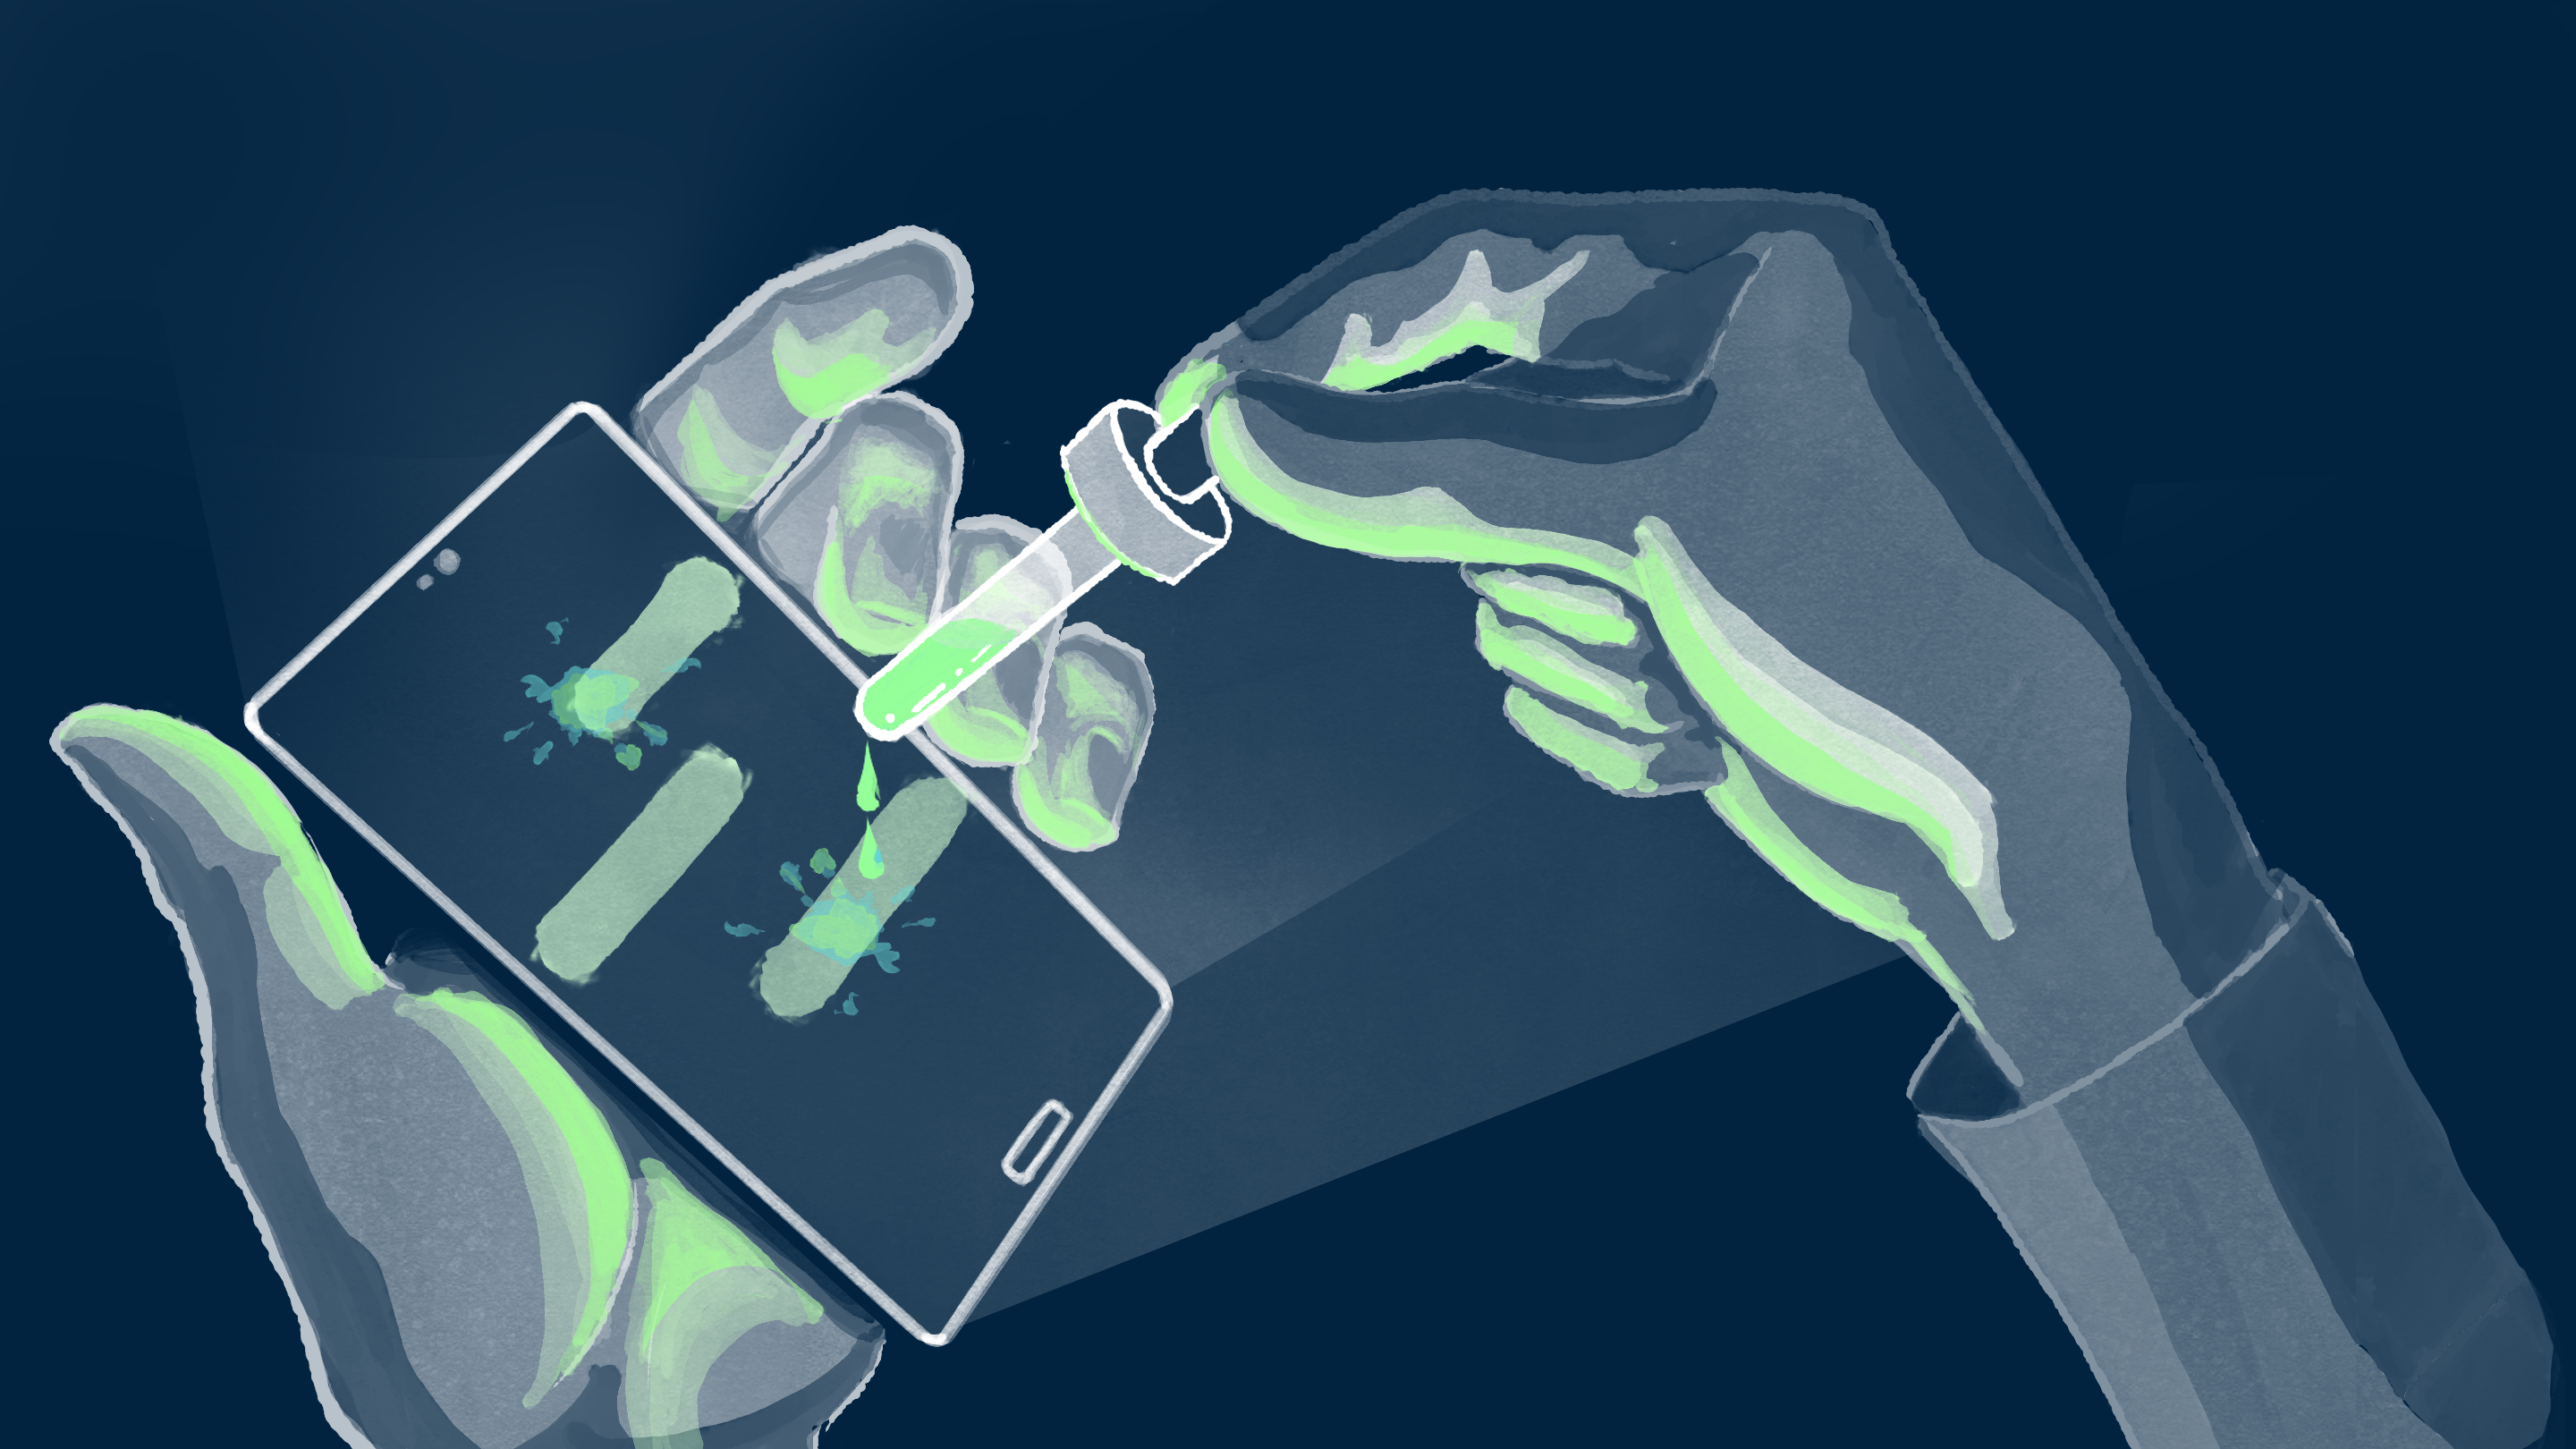 Illustration of a pair of hands in a dark setting, one holding a smartphone and the other dropping a luminescent liquid onto the screens message box.